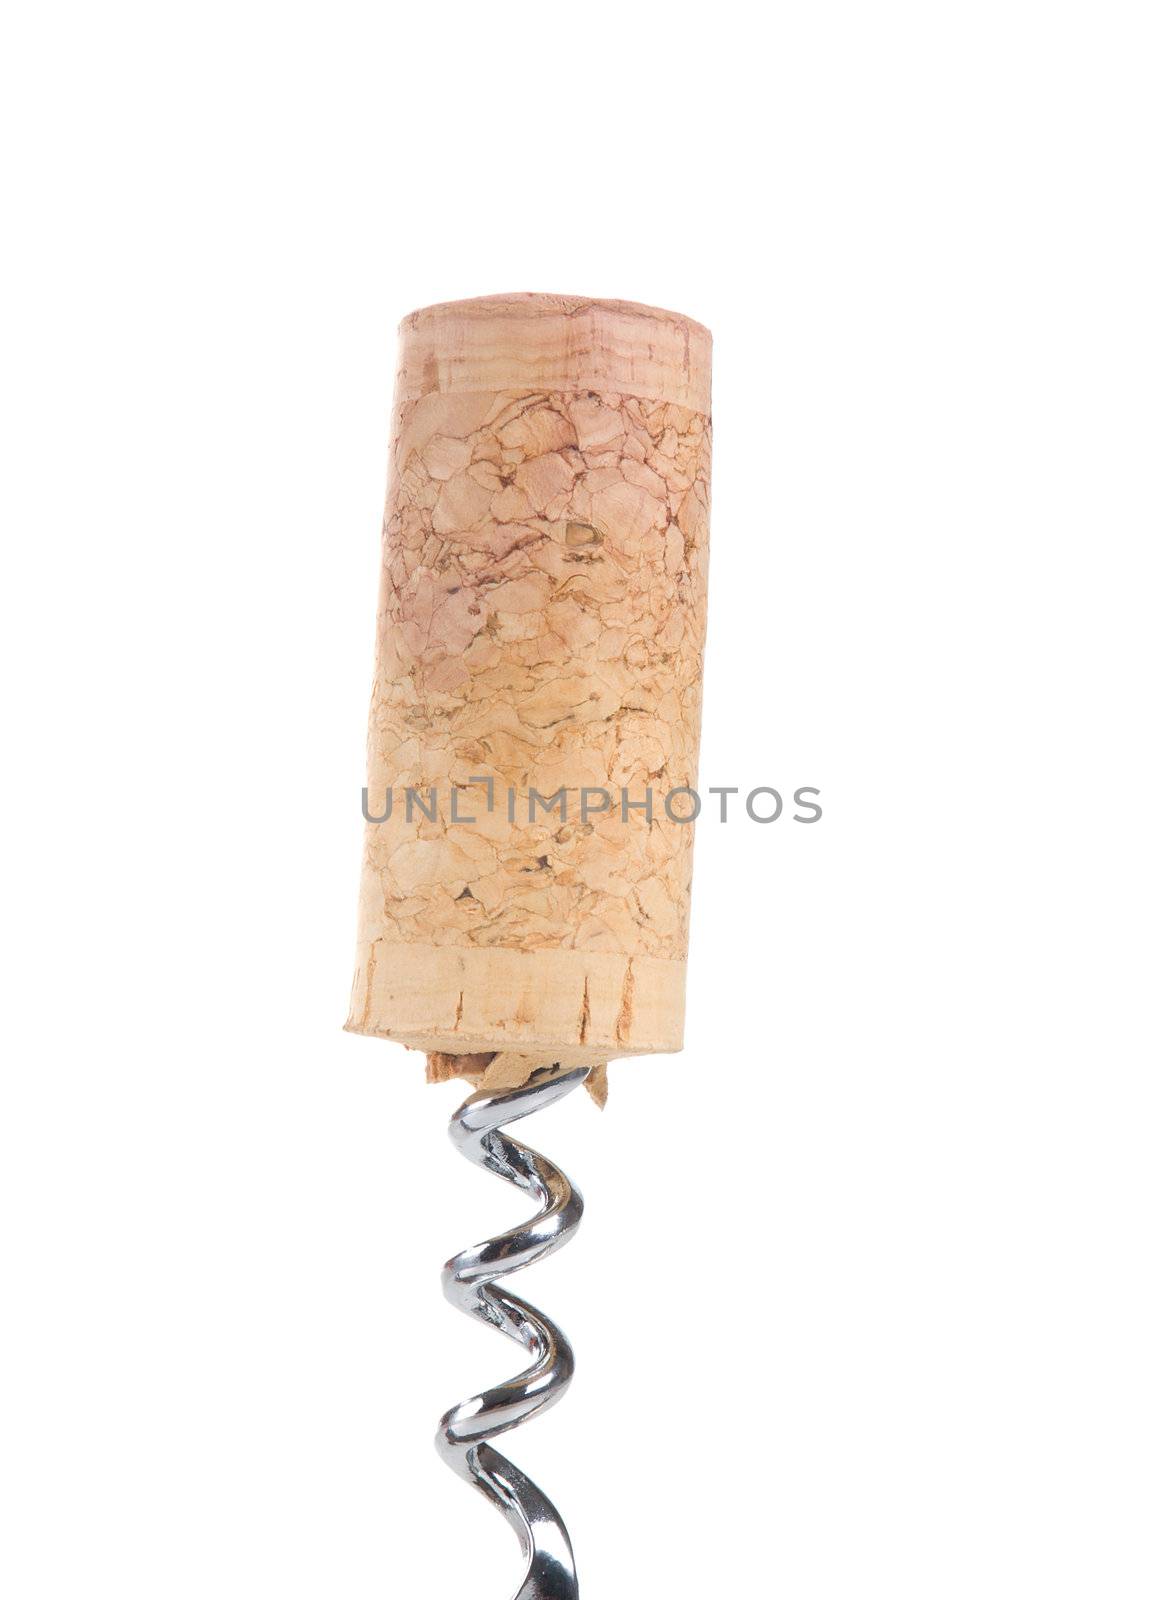 corkscrew for opening wine bottles with wine cork by Fanfo